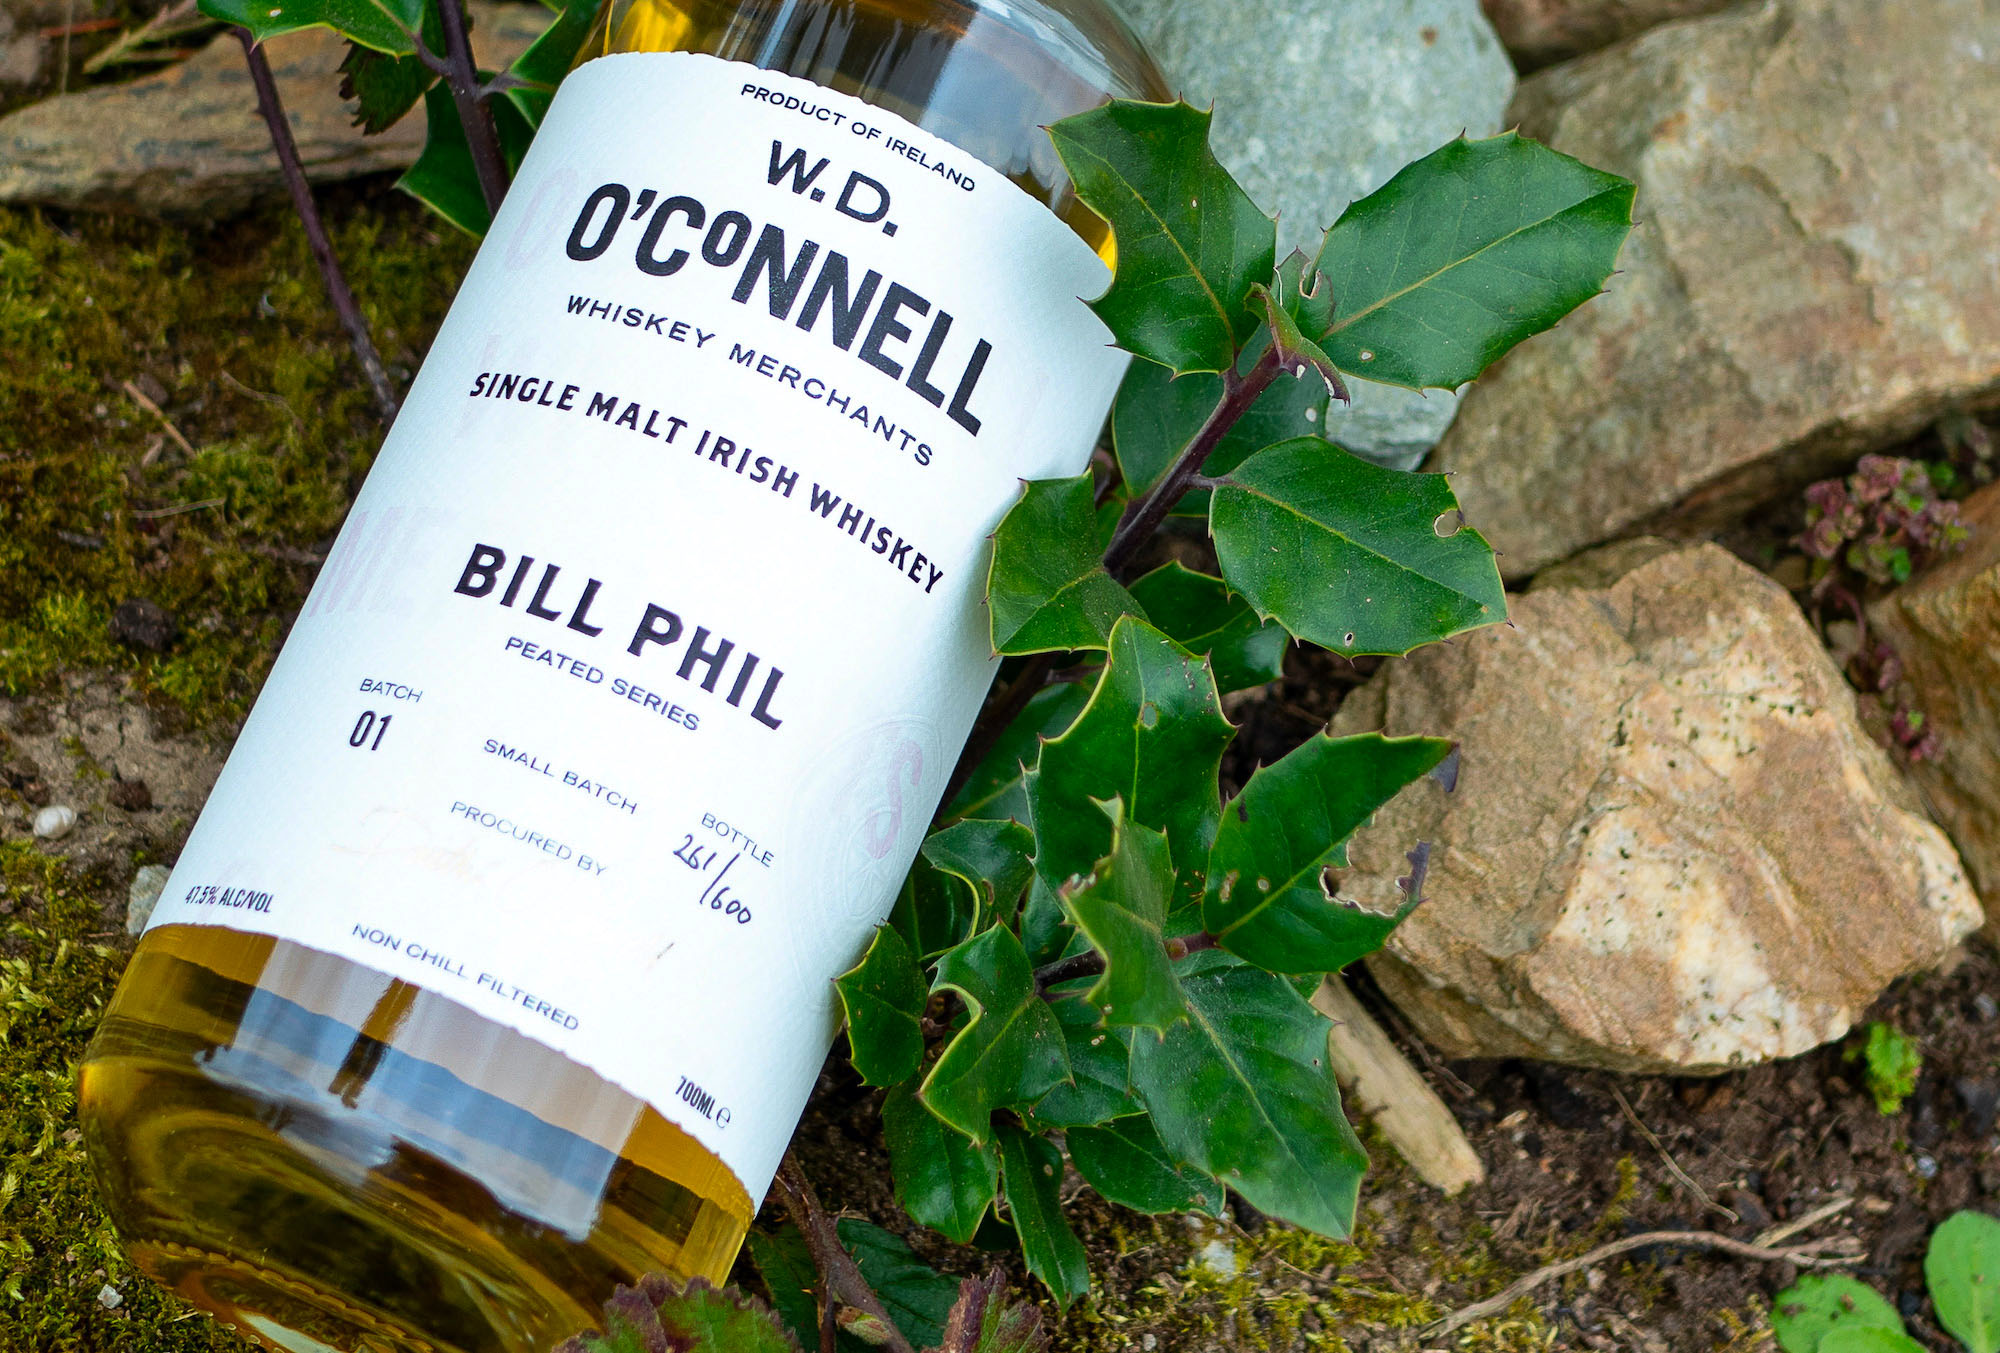 Bill Phil peated Irish whiskey, second release